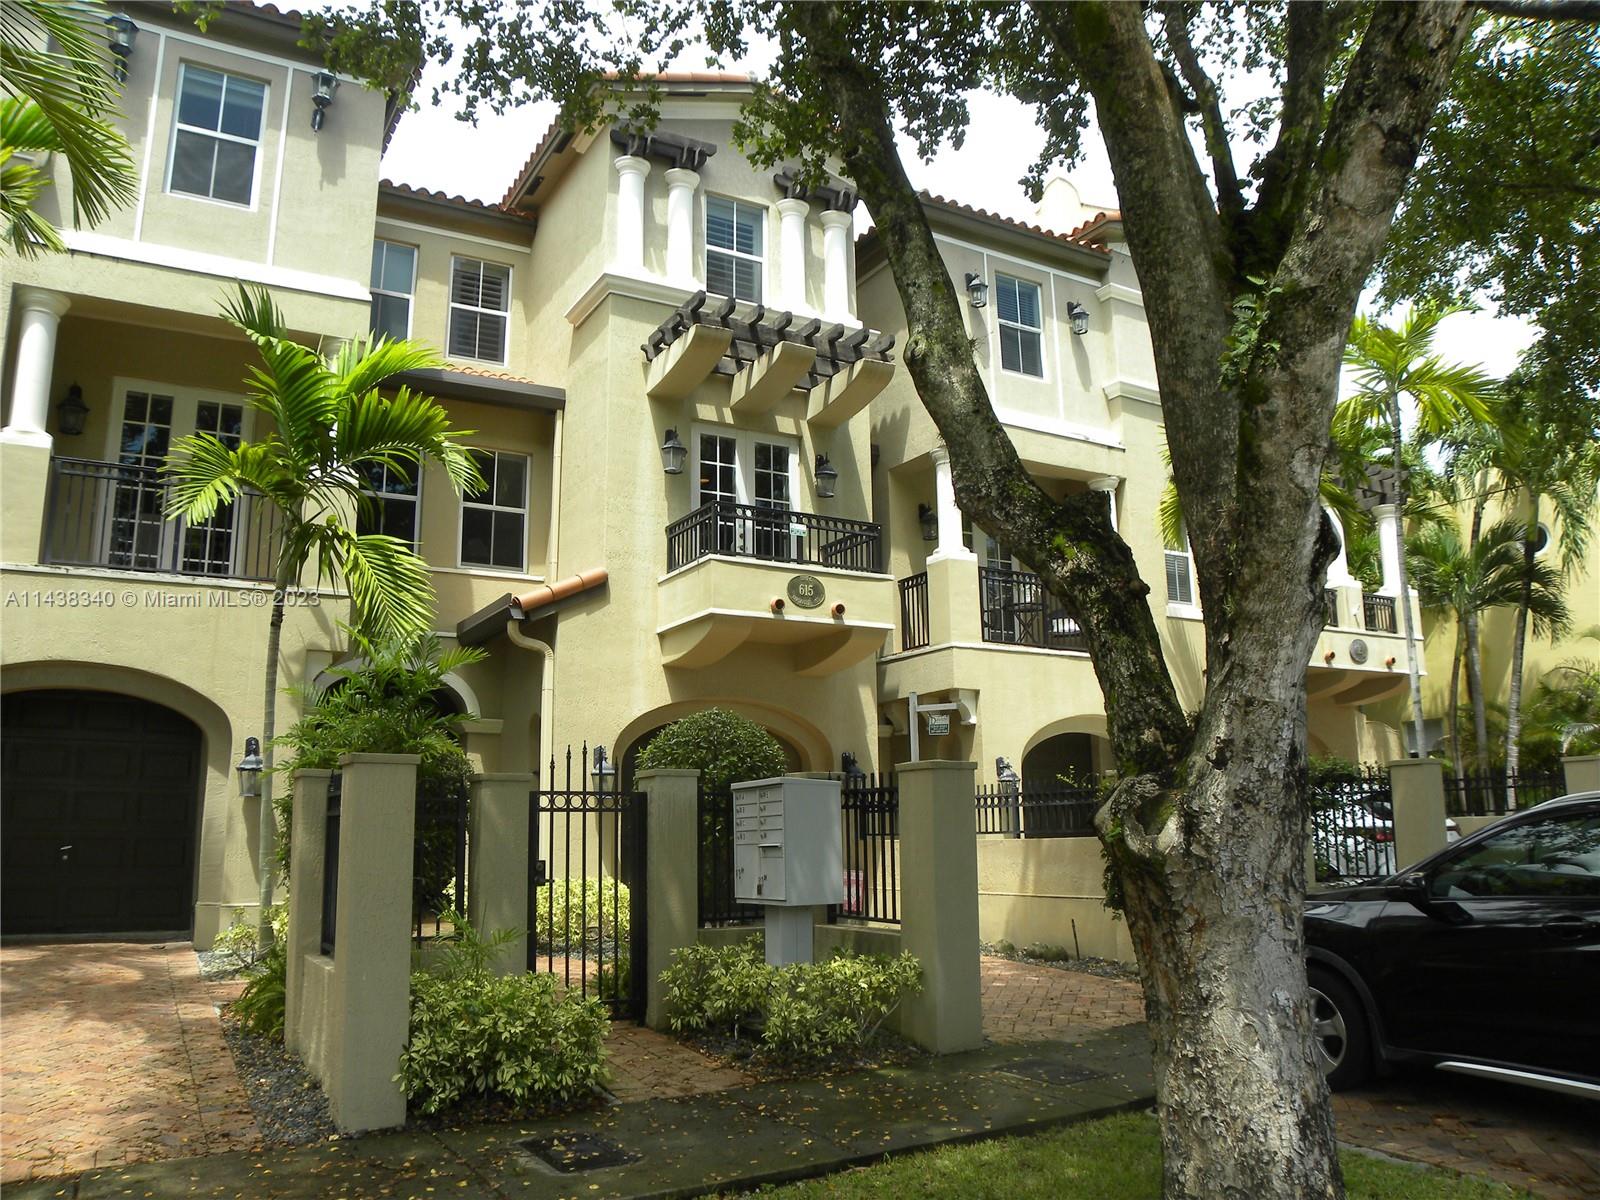 Photo 2 of 615 Santander Ave in Coral Gables - MLS A11438340